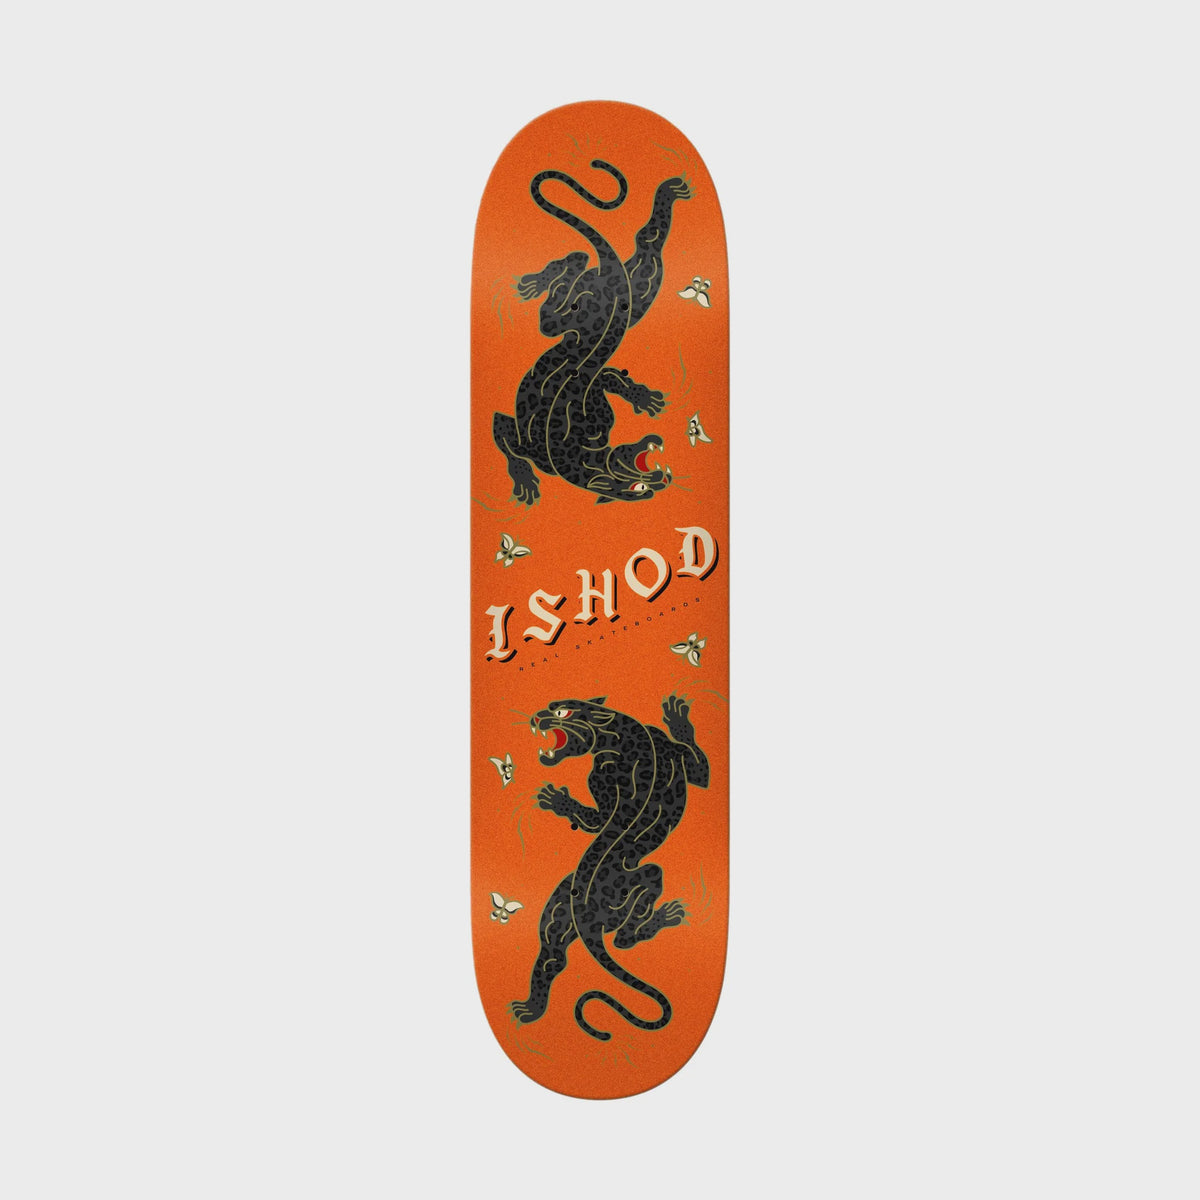 Real Ishod Cat Scratch Deck Twin Tail